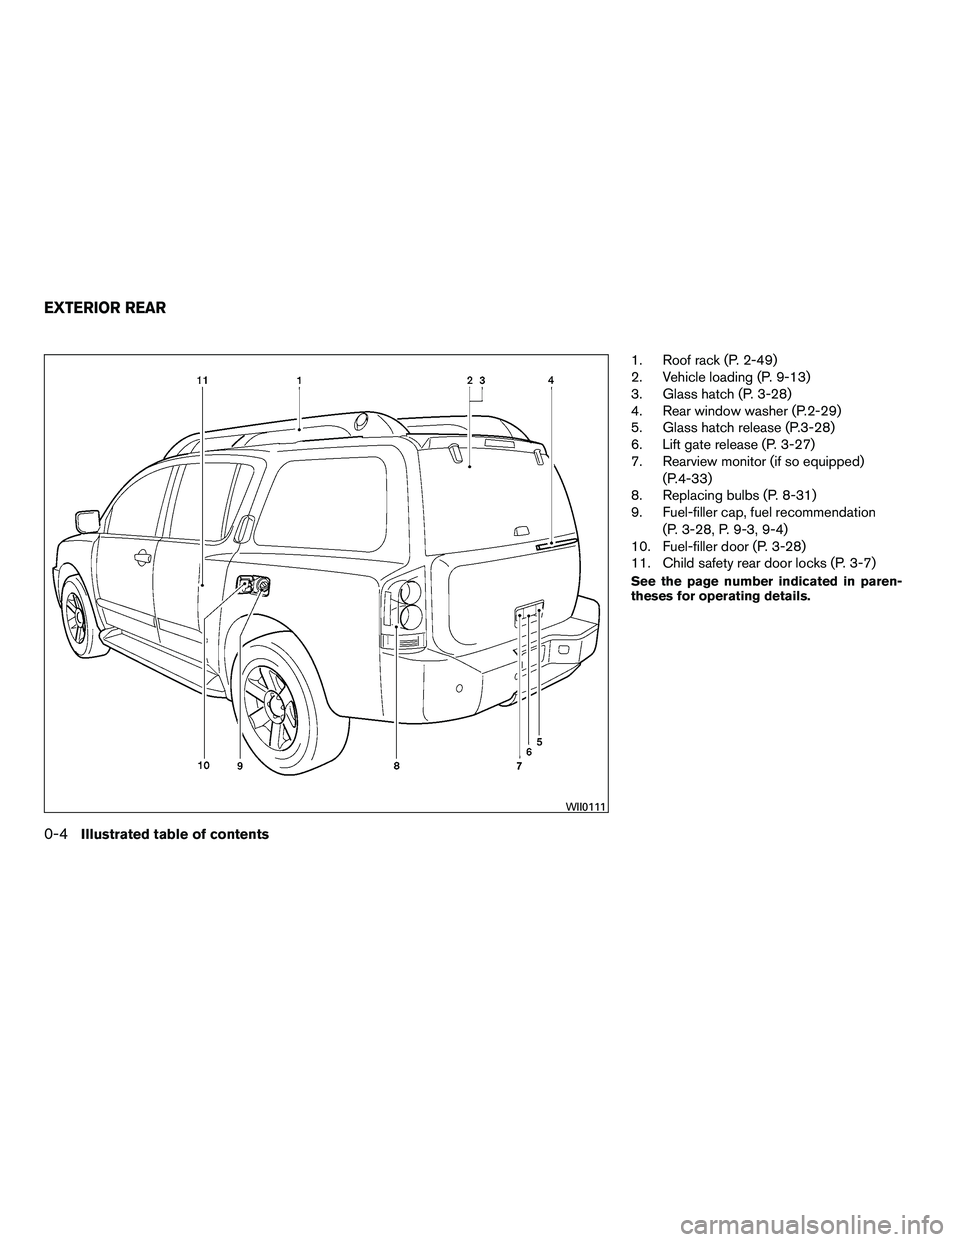 NISSAN ARMADA 2010  Owners Manual 1. Roof rack (P. 2-49)
2. Vehicle loading (P. 9-13)
3. Glass hatch (P. 3-28)
4. Rear window washer (P.2-29)
5. Glass hatch release (P.3-28)
6. Lift gate release (P. 3-27)
7. Rearview monitor (if so eq